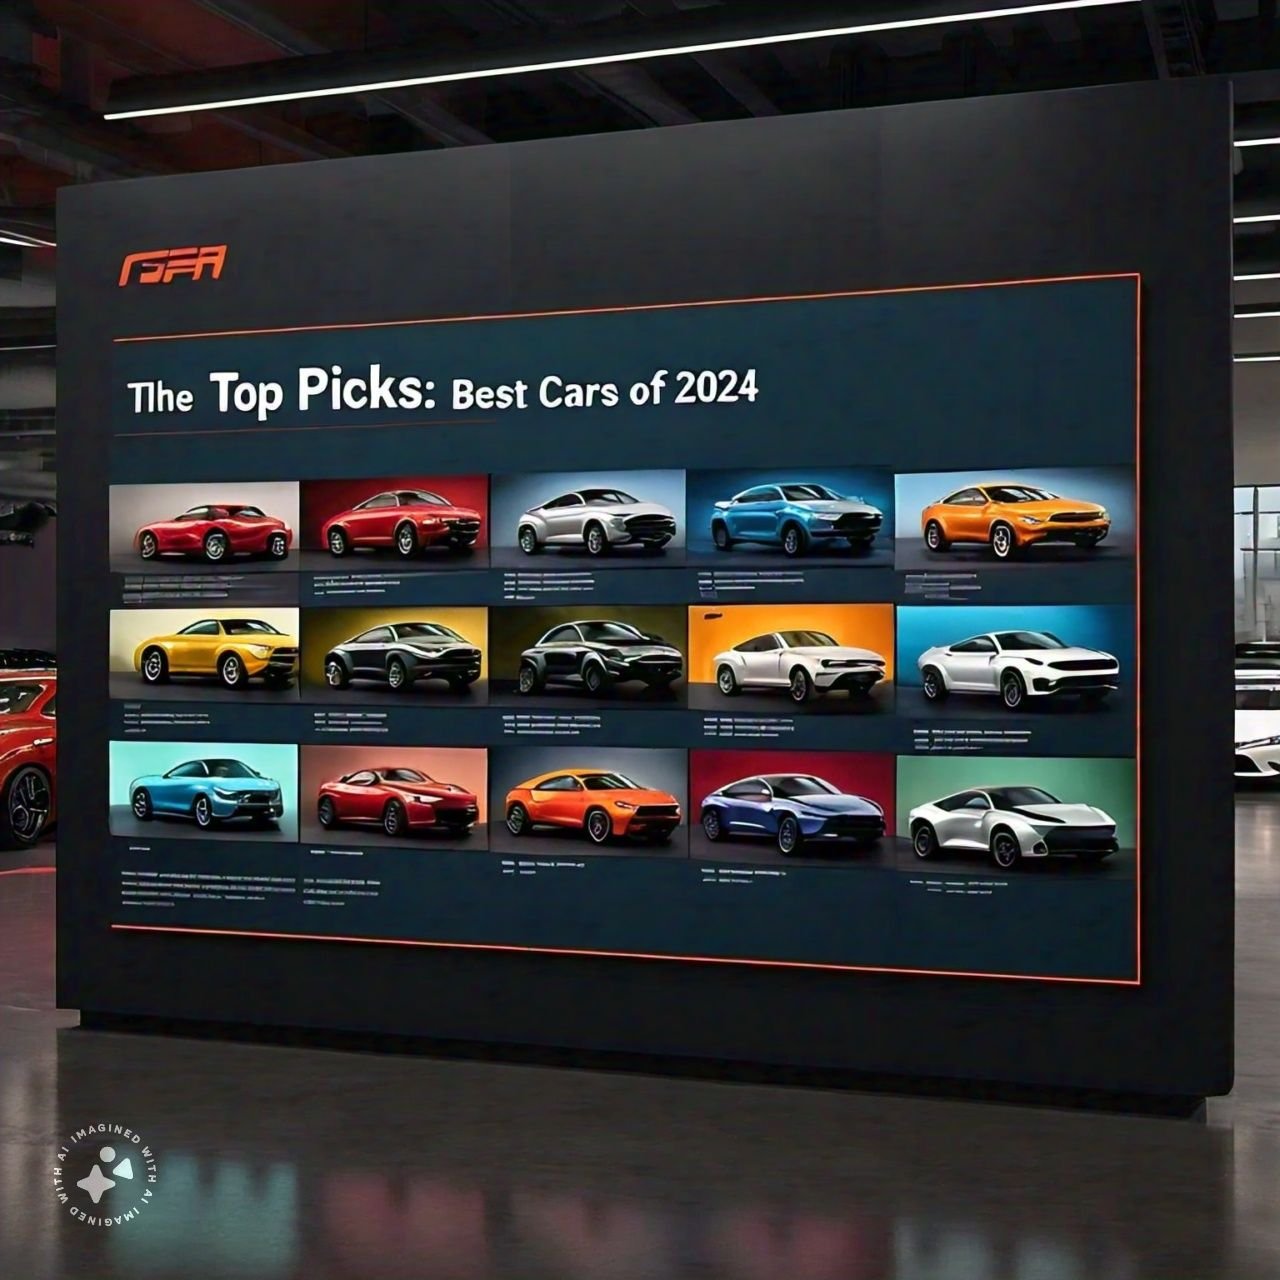 The Top Picks: Best Cars of 2024